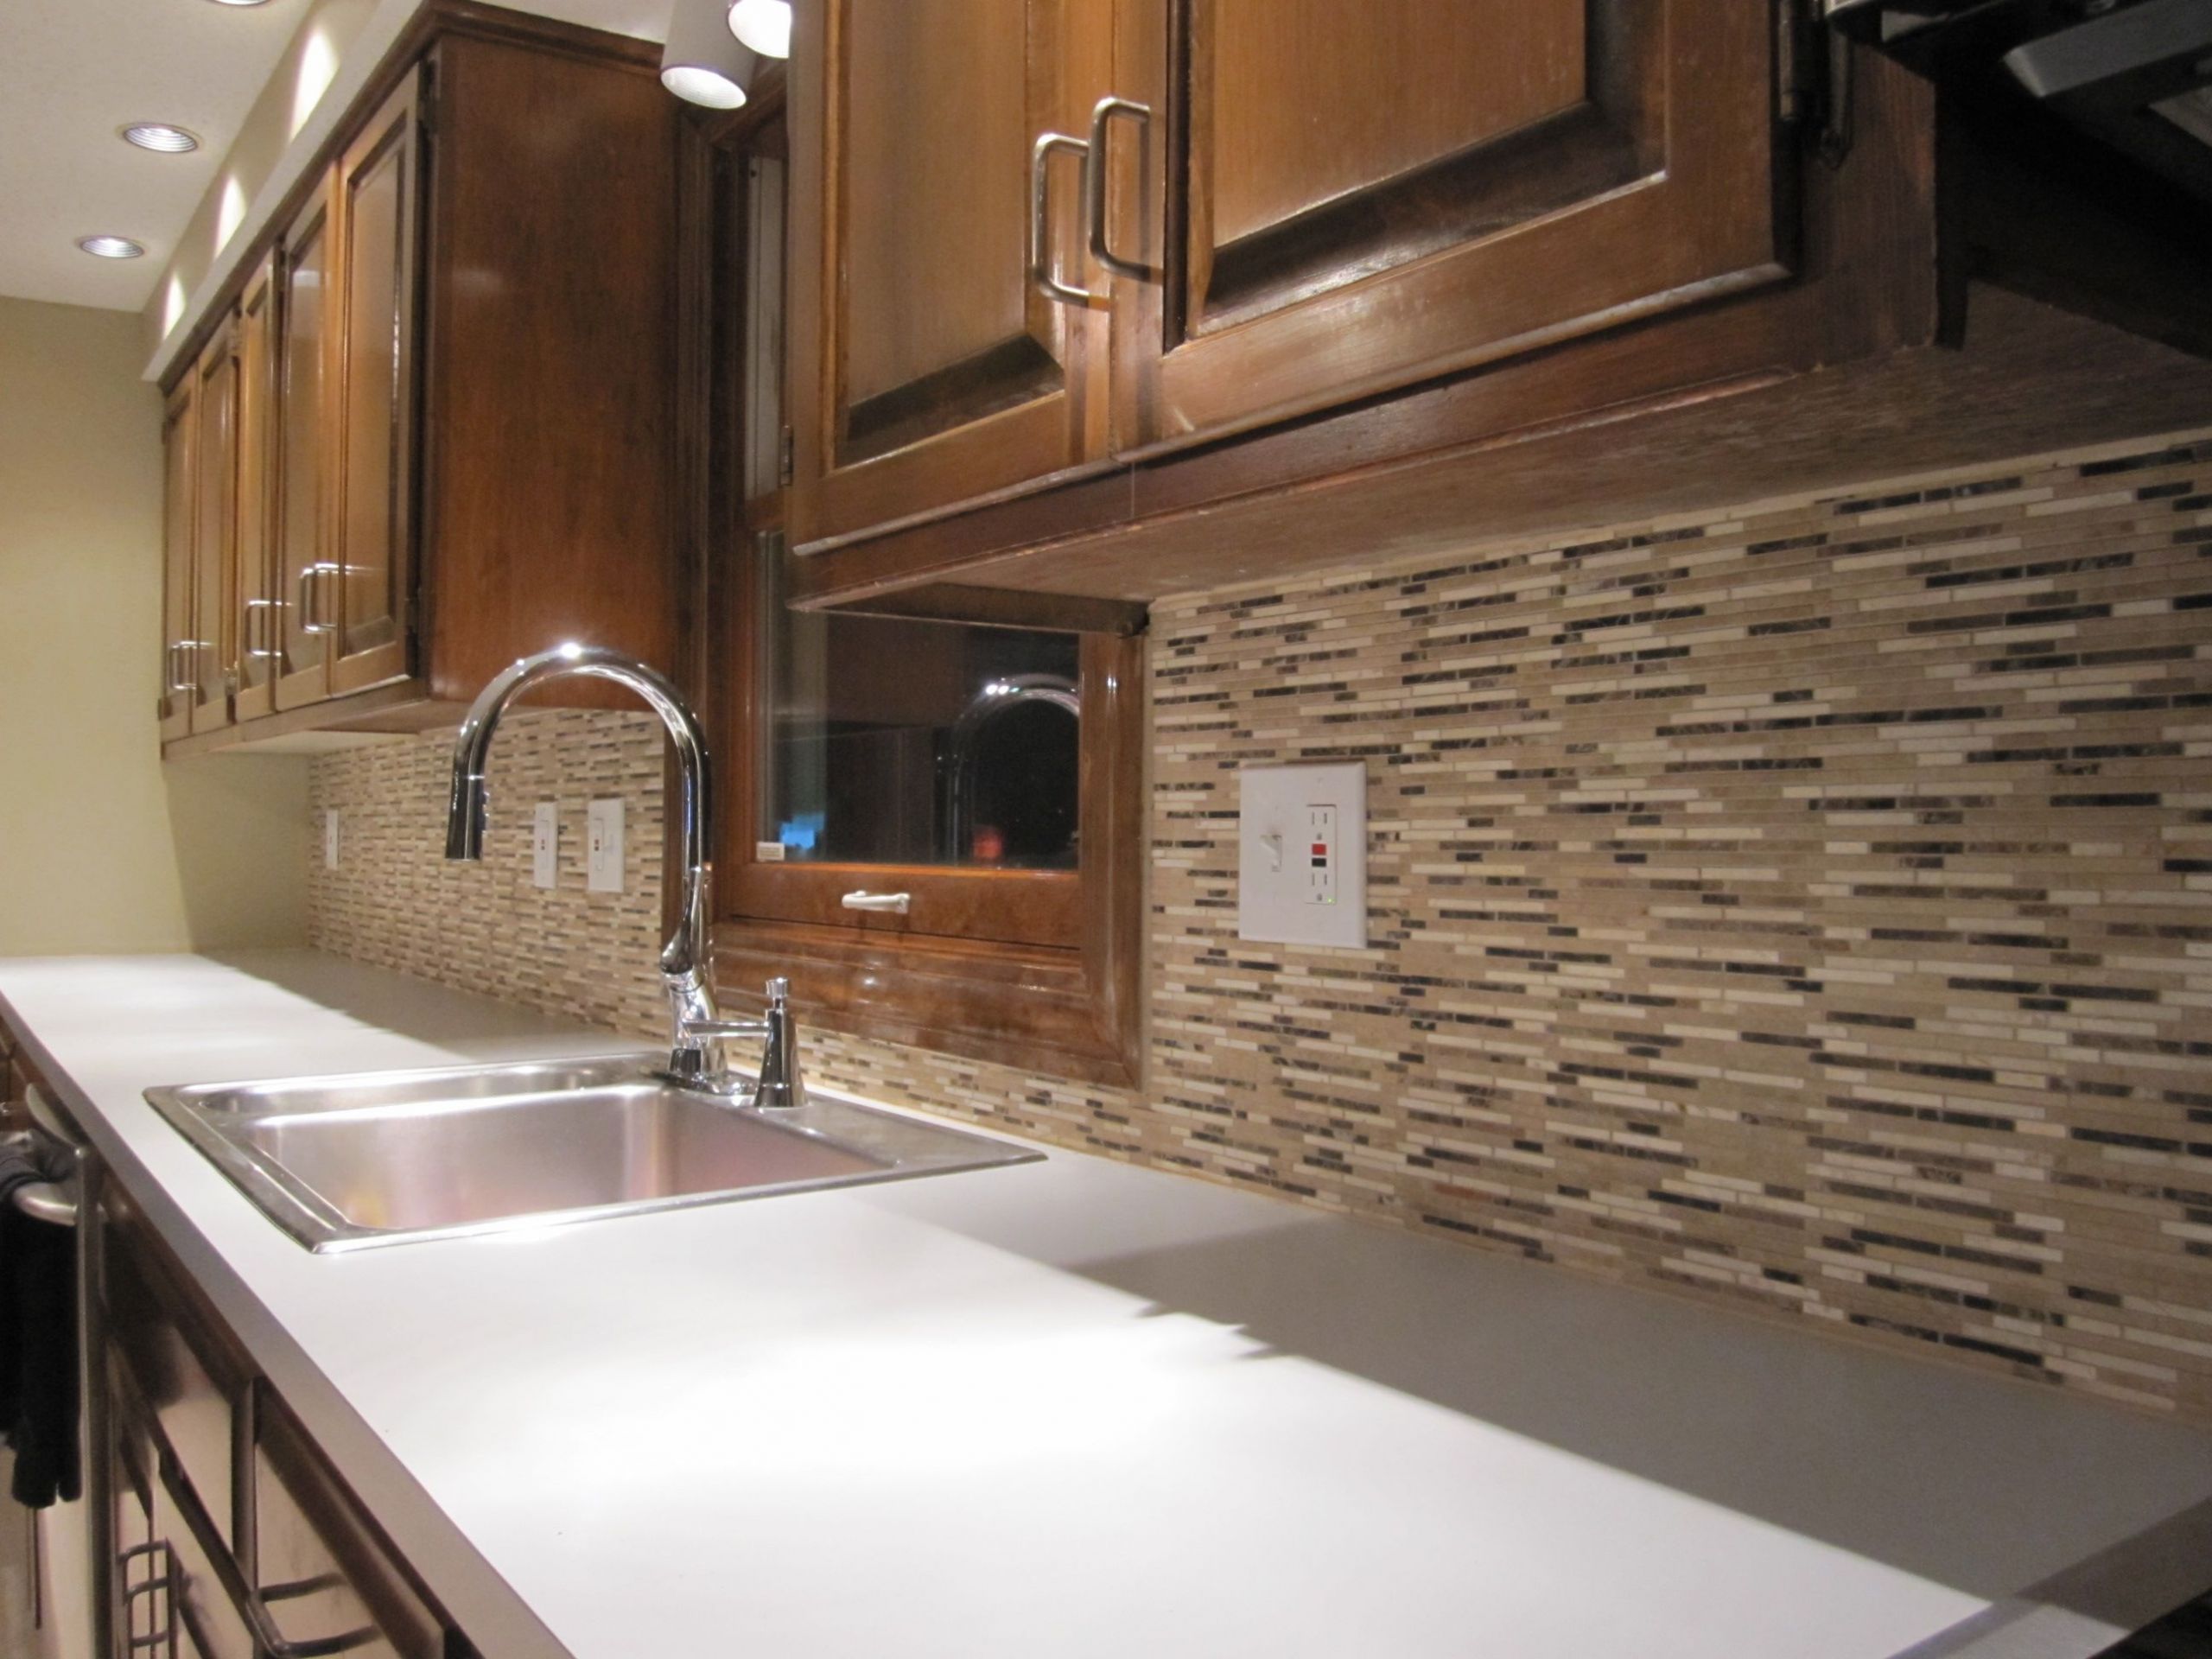 Kitchen Countertop And Backsplash Ideas
 Tiles for Kitchen Back Splash A Solution for Natural and